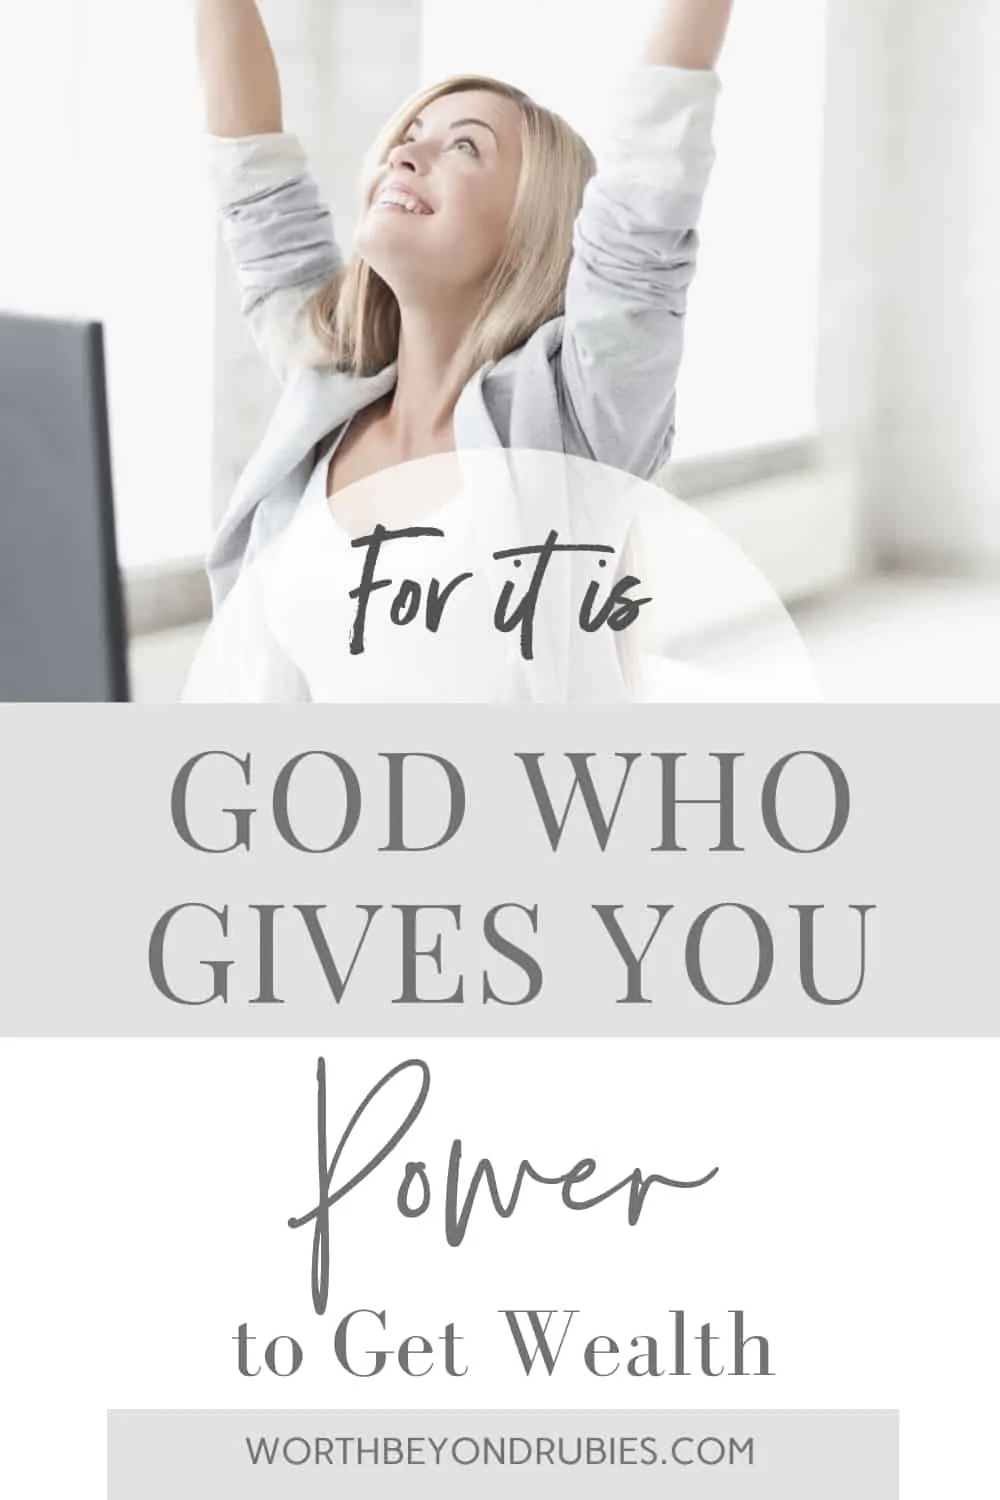 An image of a blonde woman in a gray suit and a white top sitting at a desk with her hands up in the air looking upward and text that says For it is God Who Gives You Power to Get Wealth